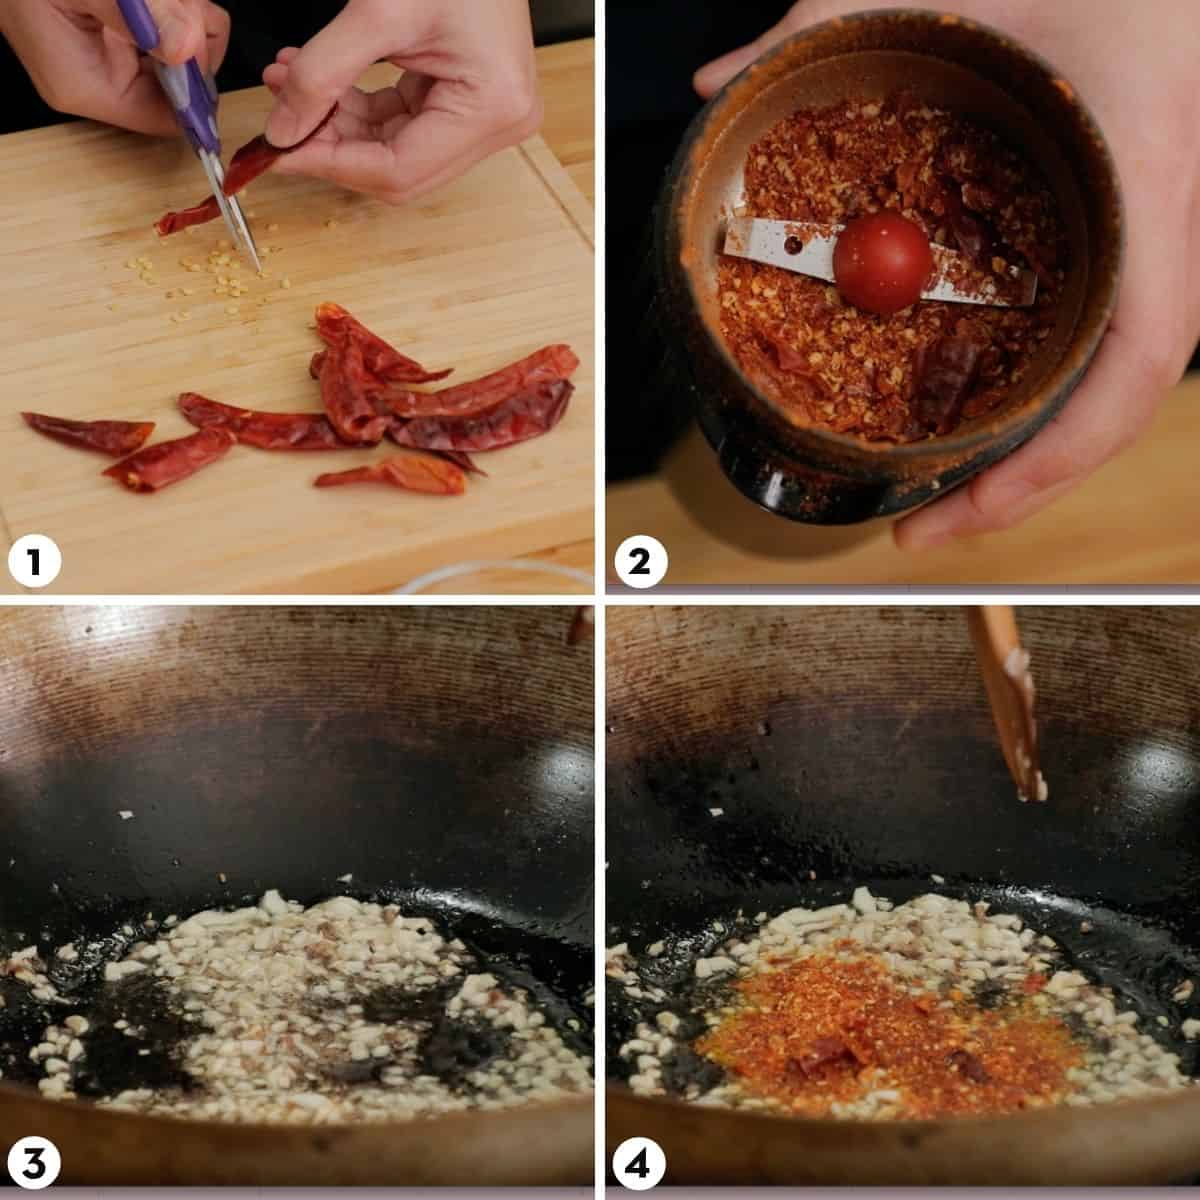 Process shots for how to make chili garlic noodles, step 1-4